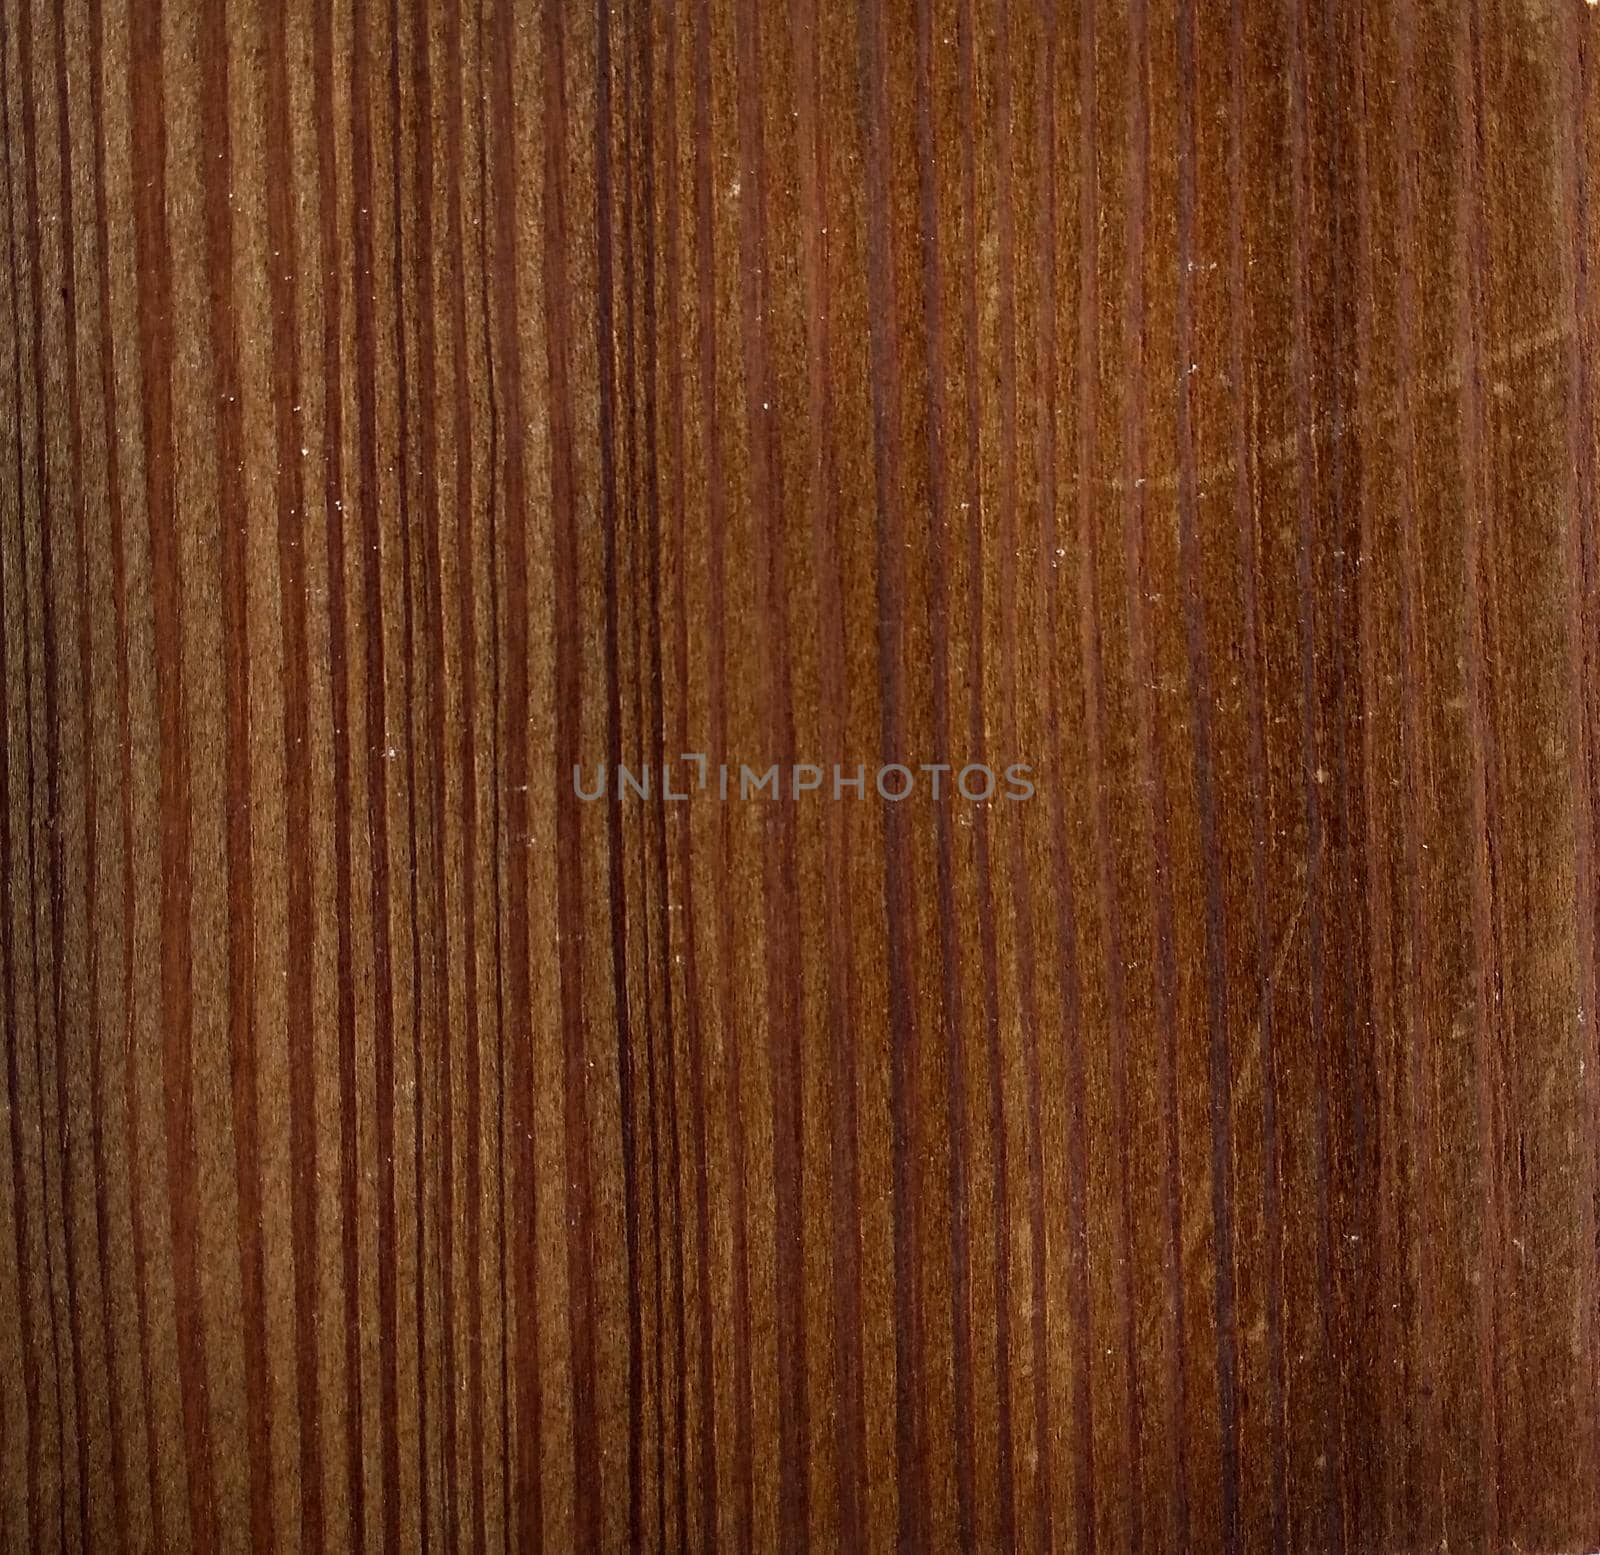 Natural Smoked larch (light) wood texture background. Smoked larch (light) veneer surface for interior and exterior manufacturers use.